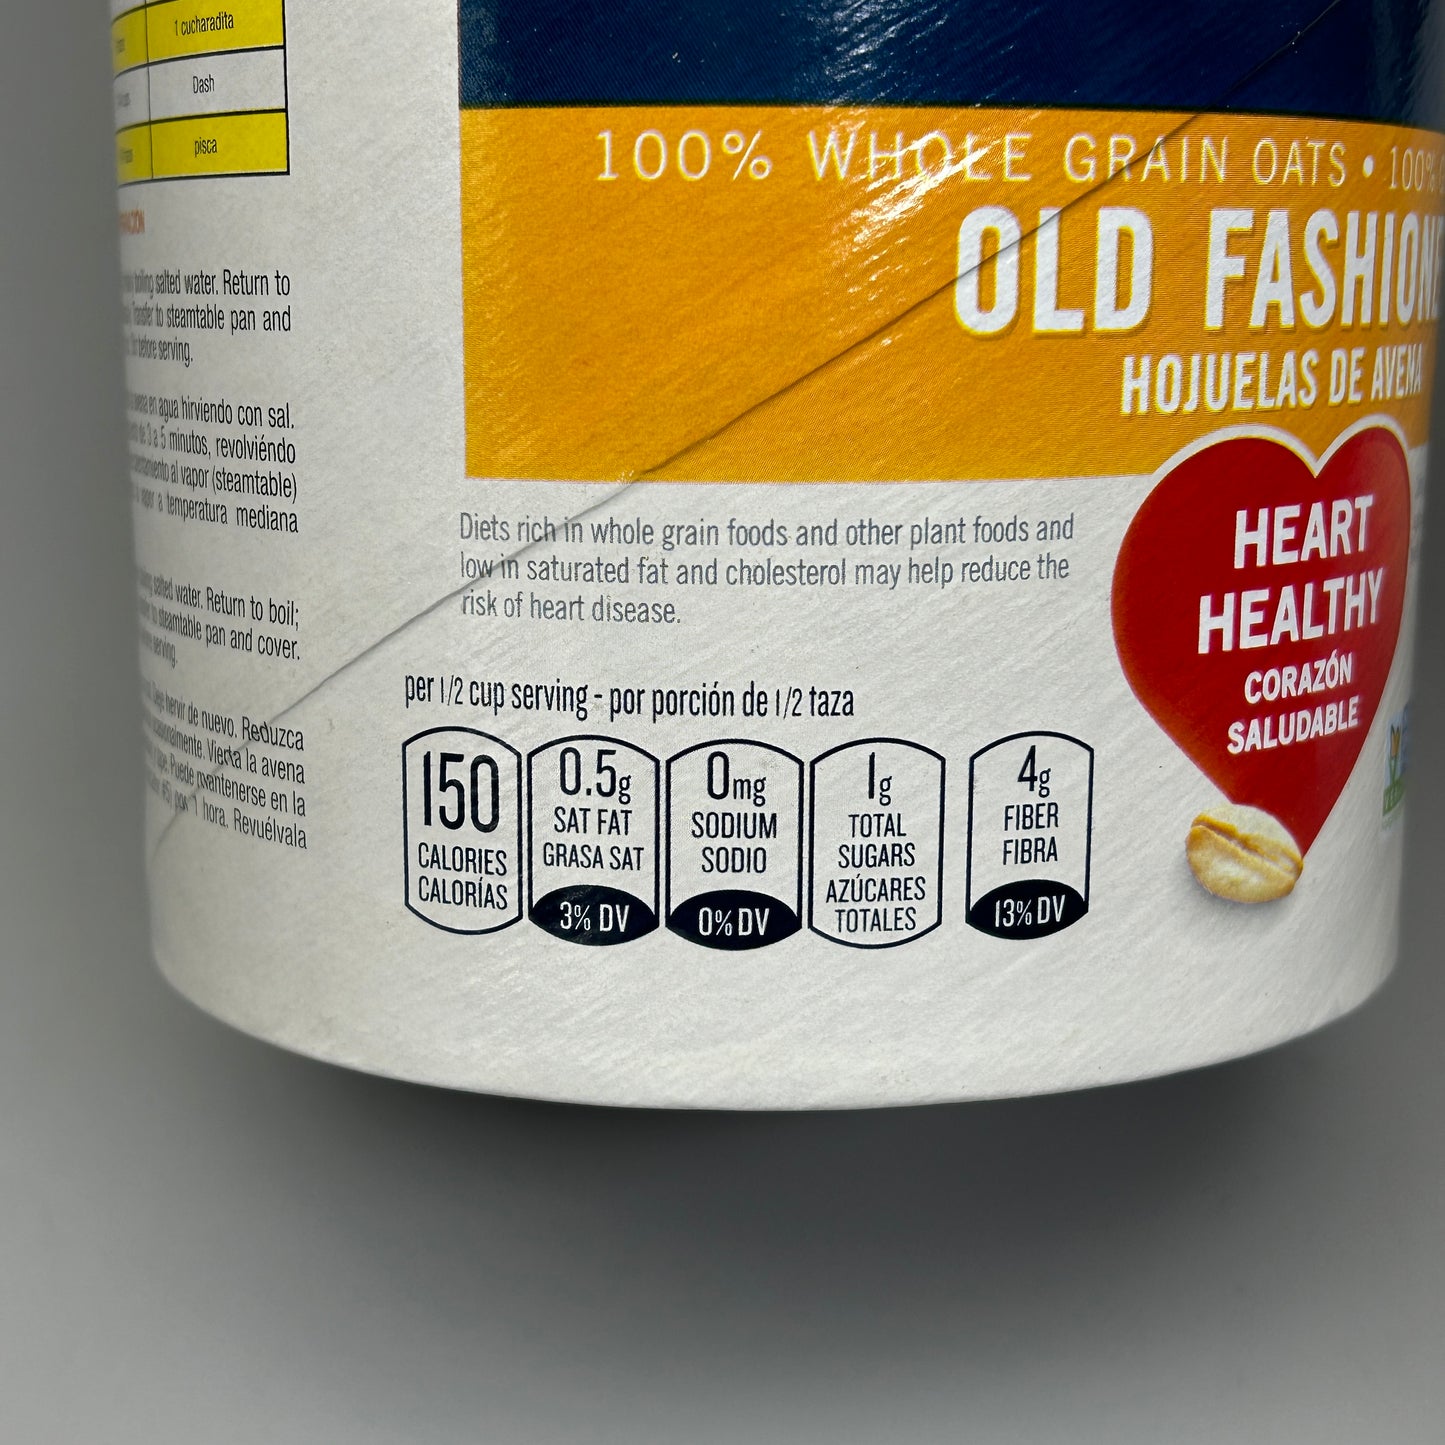 QUAKER OATS 3-PK! Old Fashioned Whole Grain Oats 42 oz Canisters BB 5/24 (New)